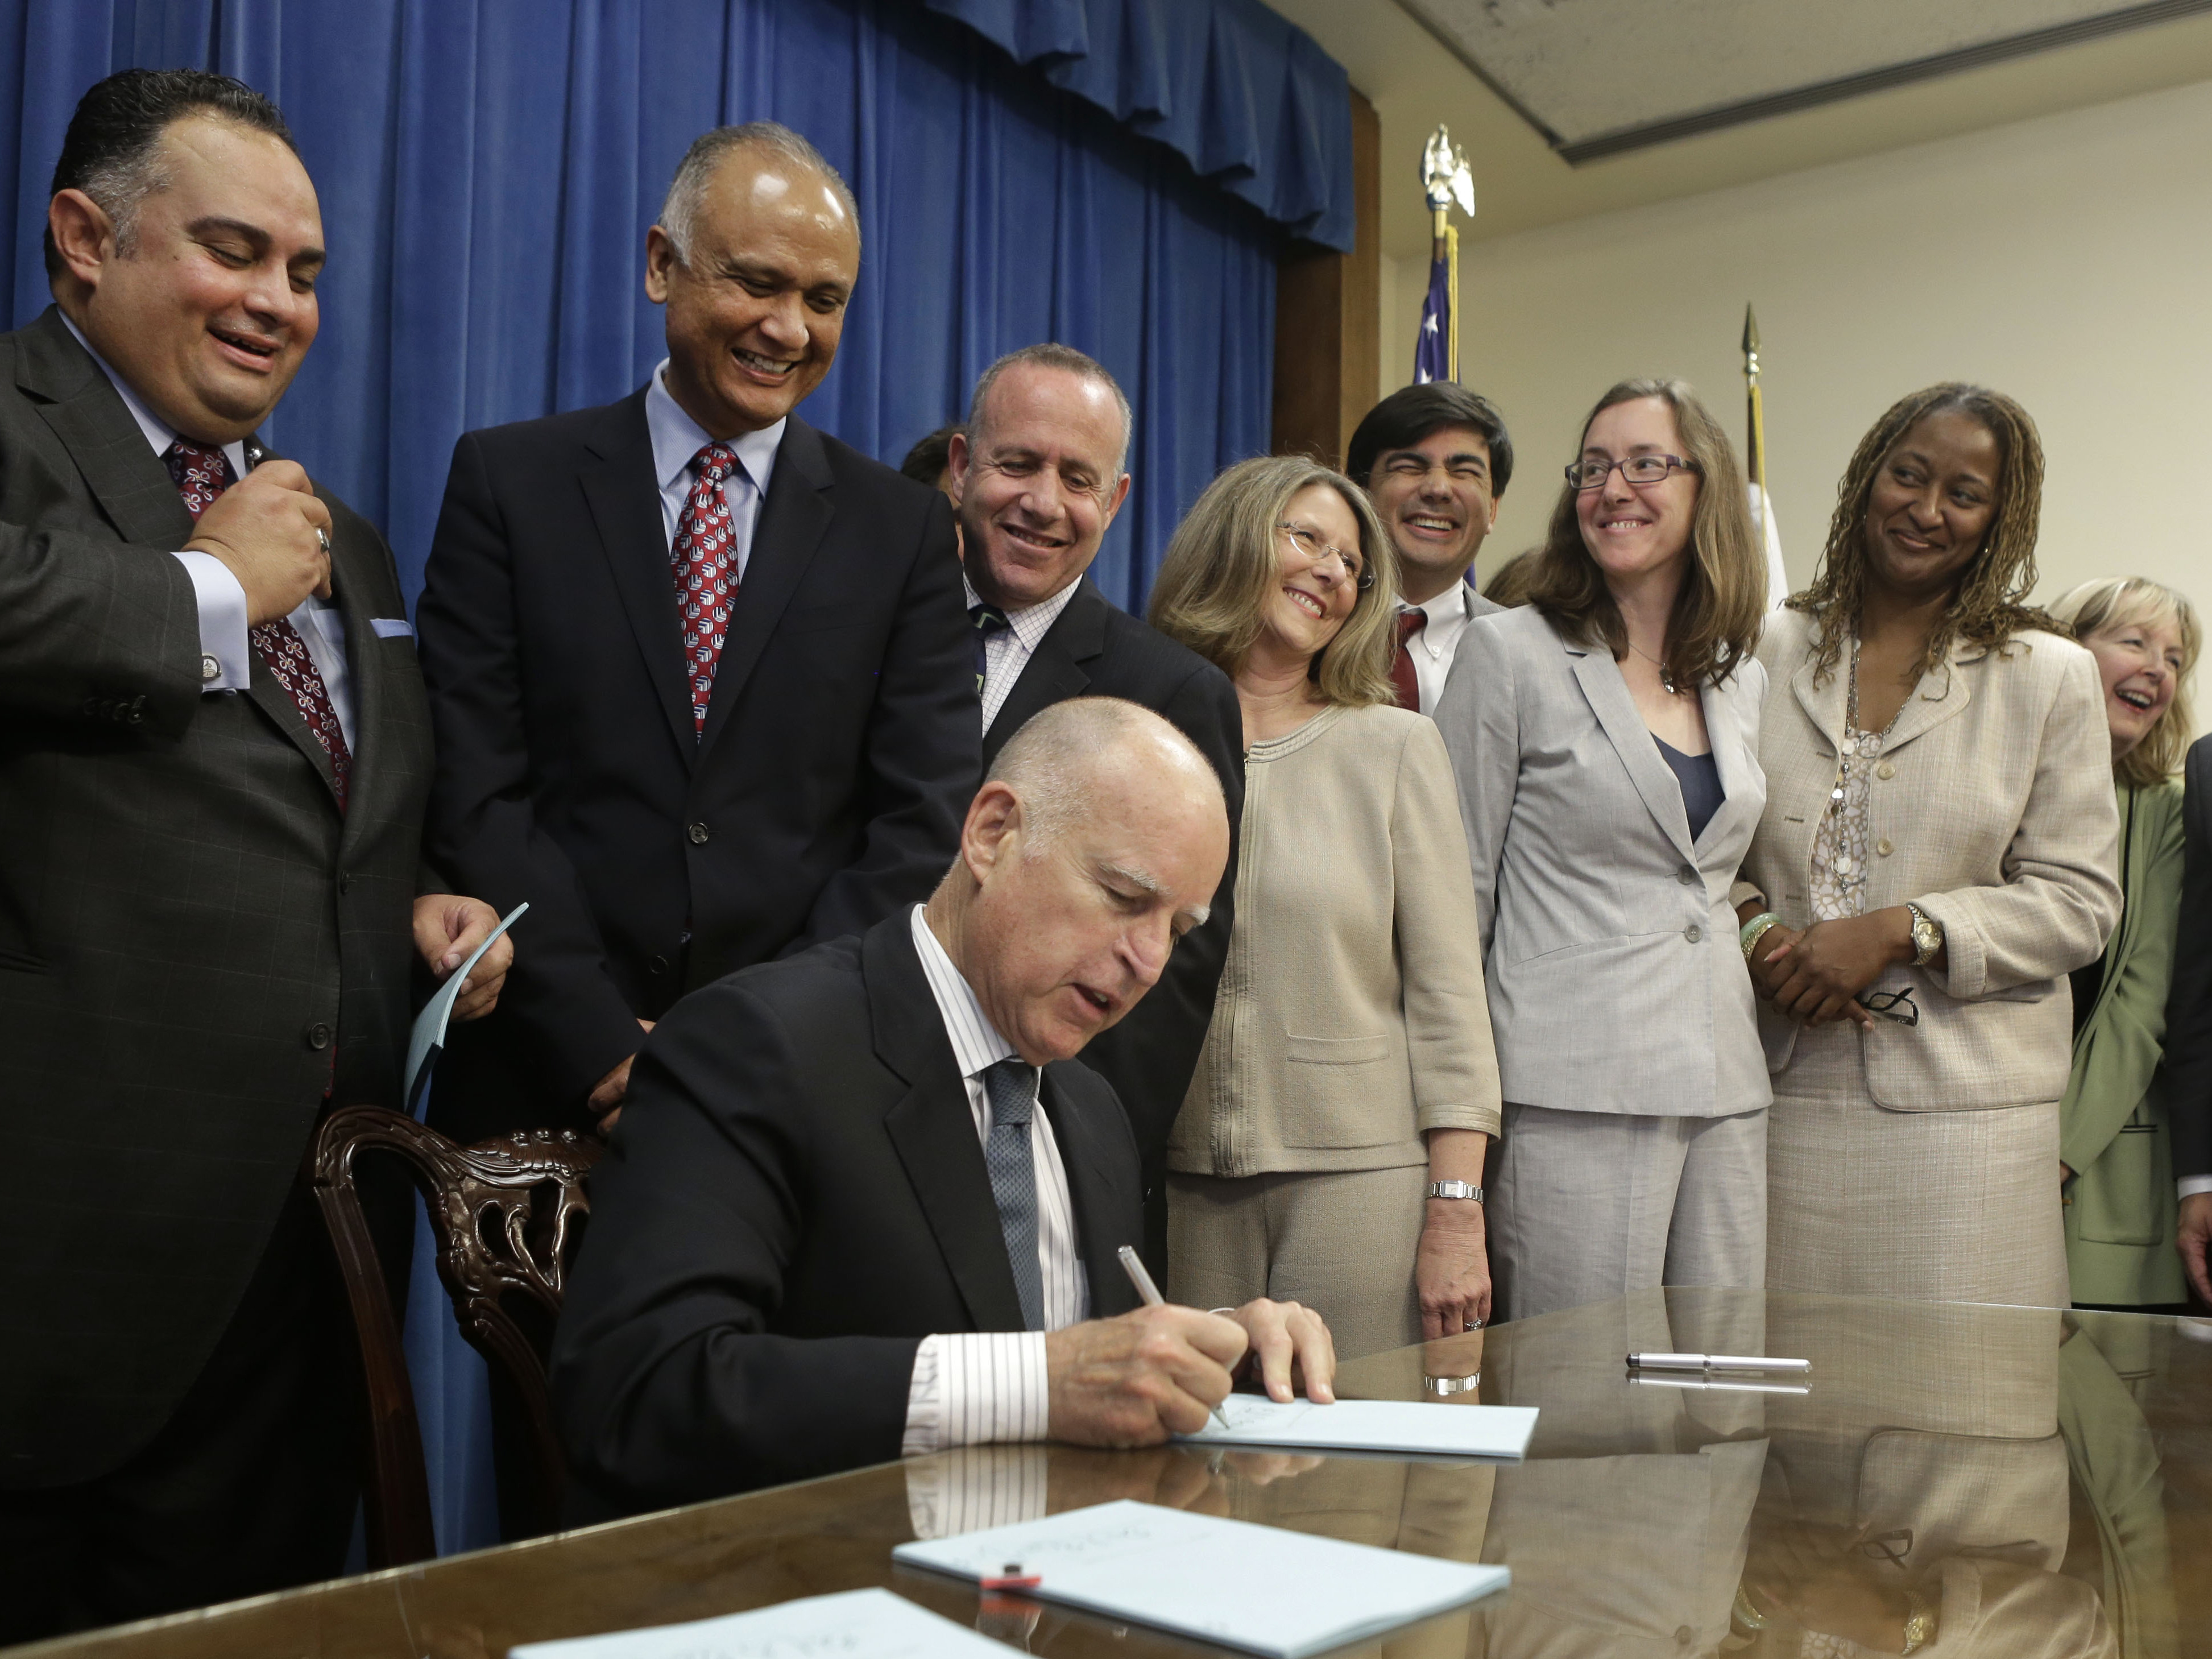 Gov. Jerry Brown signed California's Medicaid expansion bill into law in June 2013. Since then, the number of people enrolled in Medi-Cal, the state's version of Medicaid, has surged. (Photo by Rich Pedroncelli/AP)